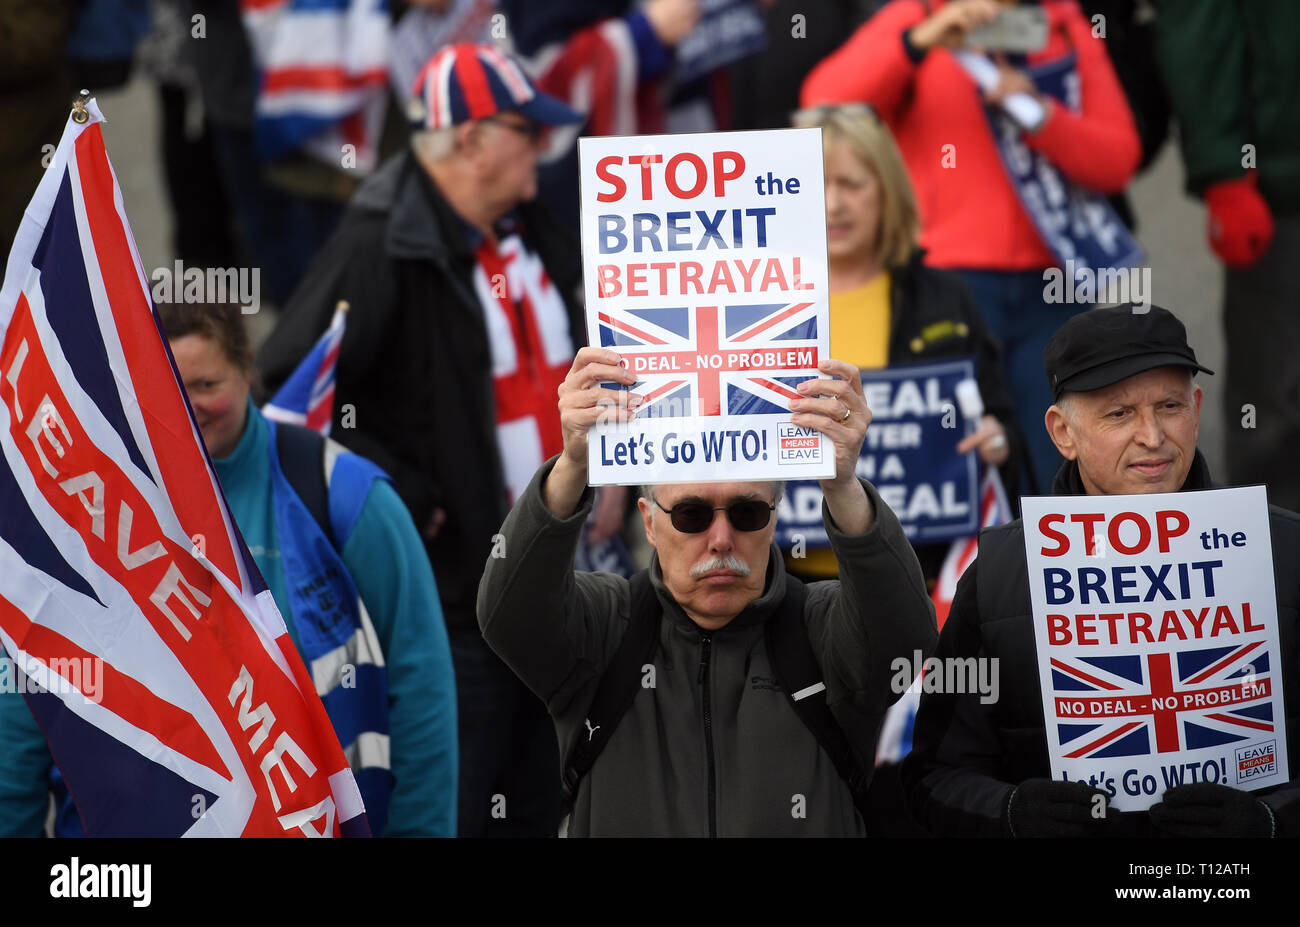 March to Leave protesters set off from Linby in Nottingham on their way to London over a 14-day period, arriving in the capital on March 29, where a mass rally will take place on Parliament Square. Stock Photo